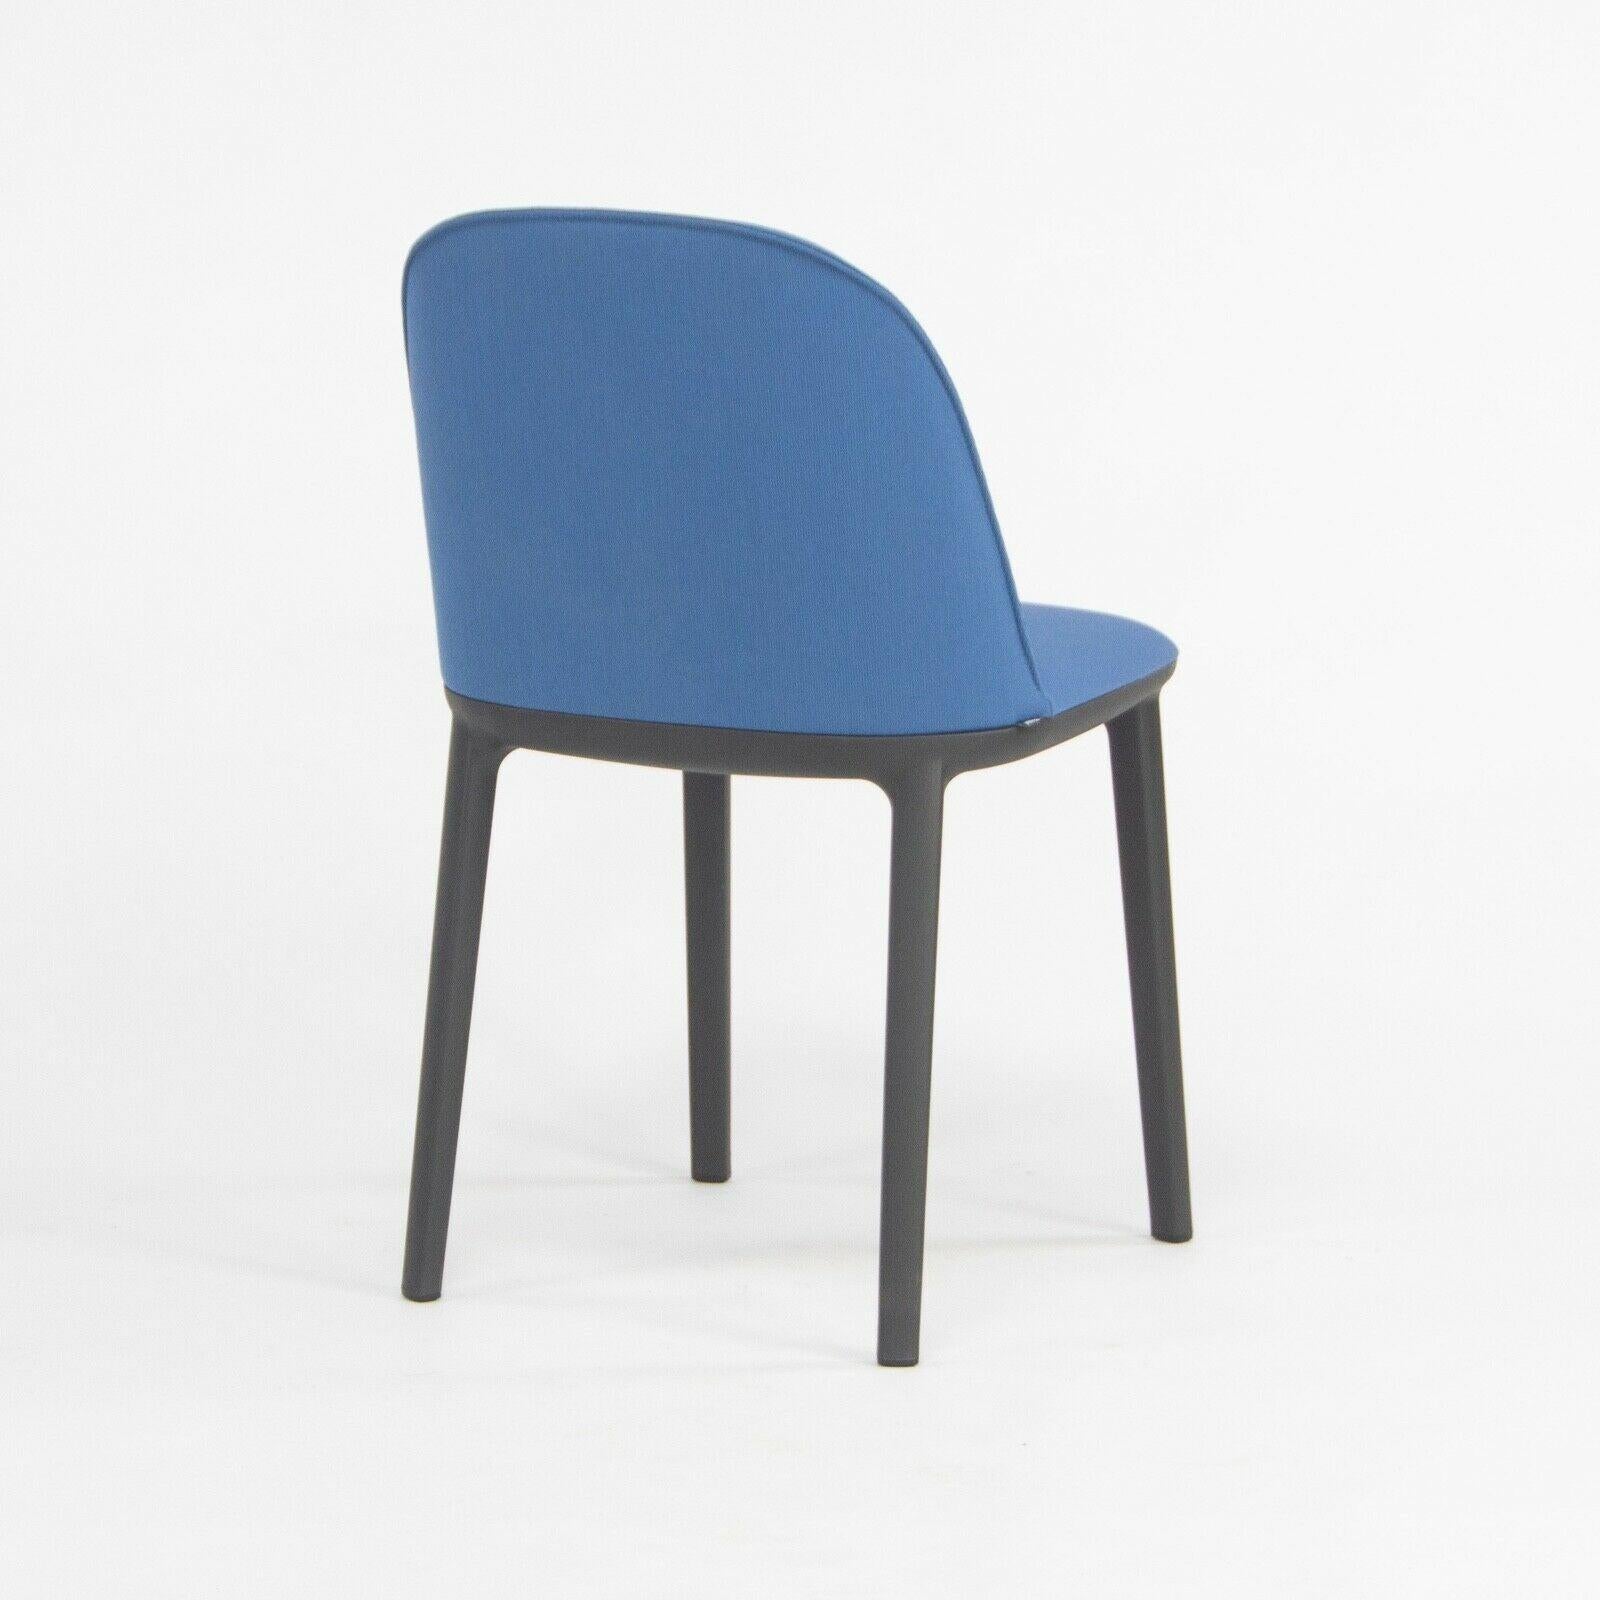 Plastic 2019 Vitra Softshell Side Chair w/ Light Blue Fabric by Ronan & Erwan Bouroullec For Sale